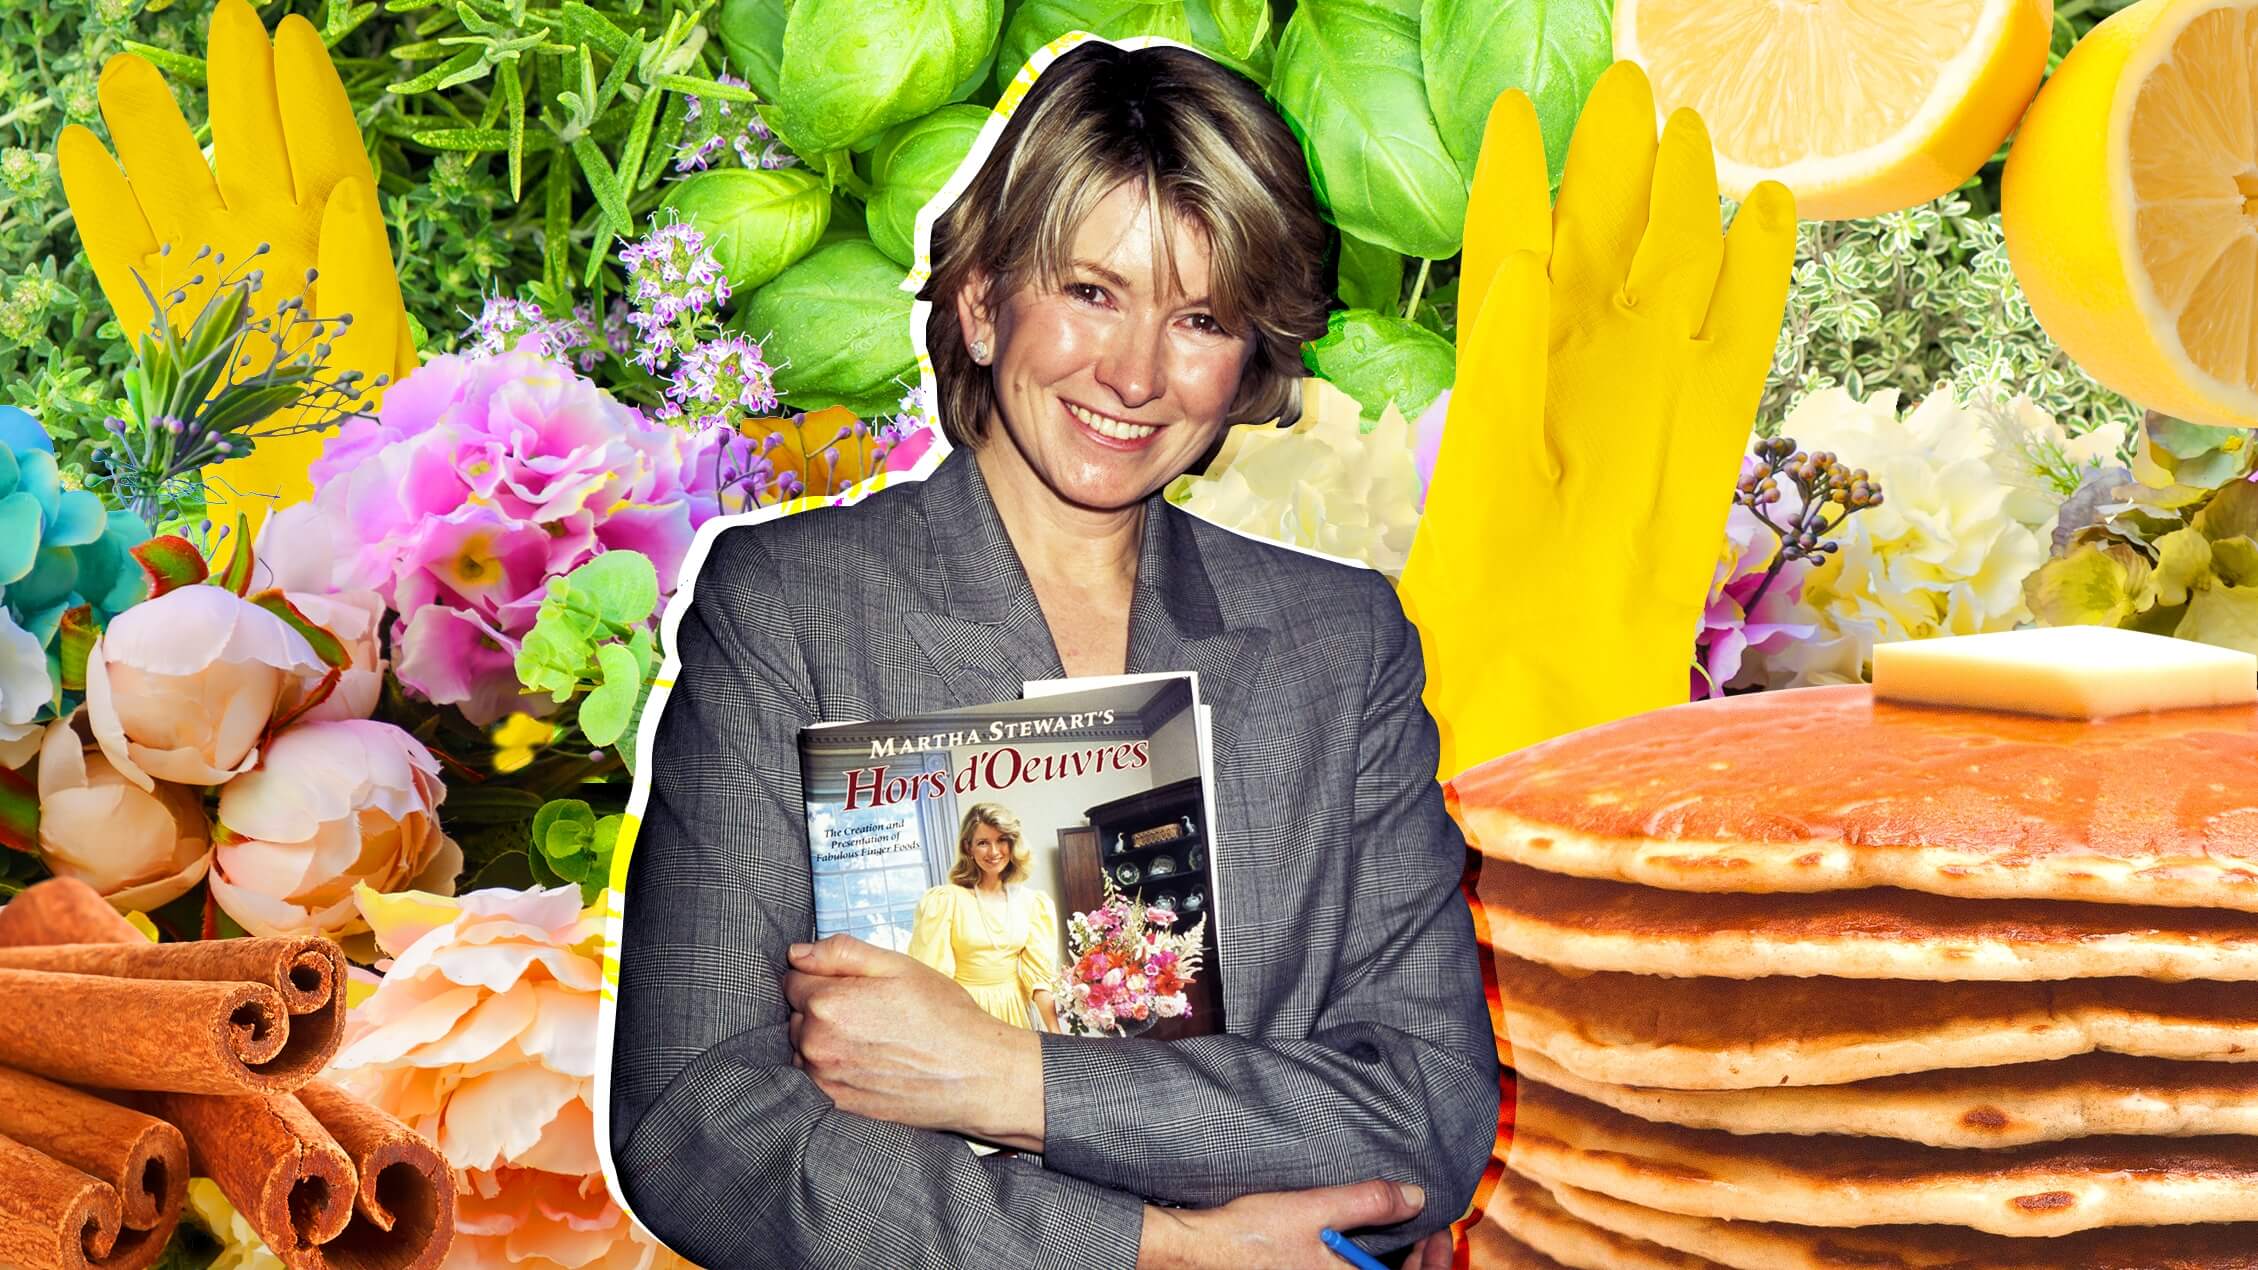 Martha Stewart Living helped kick off a domestic explosion in the ’90s